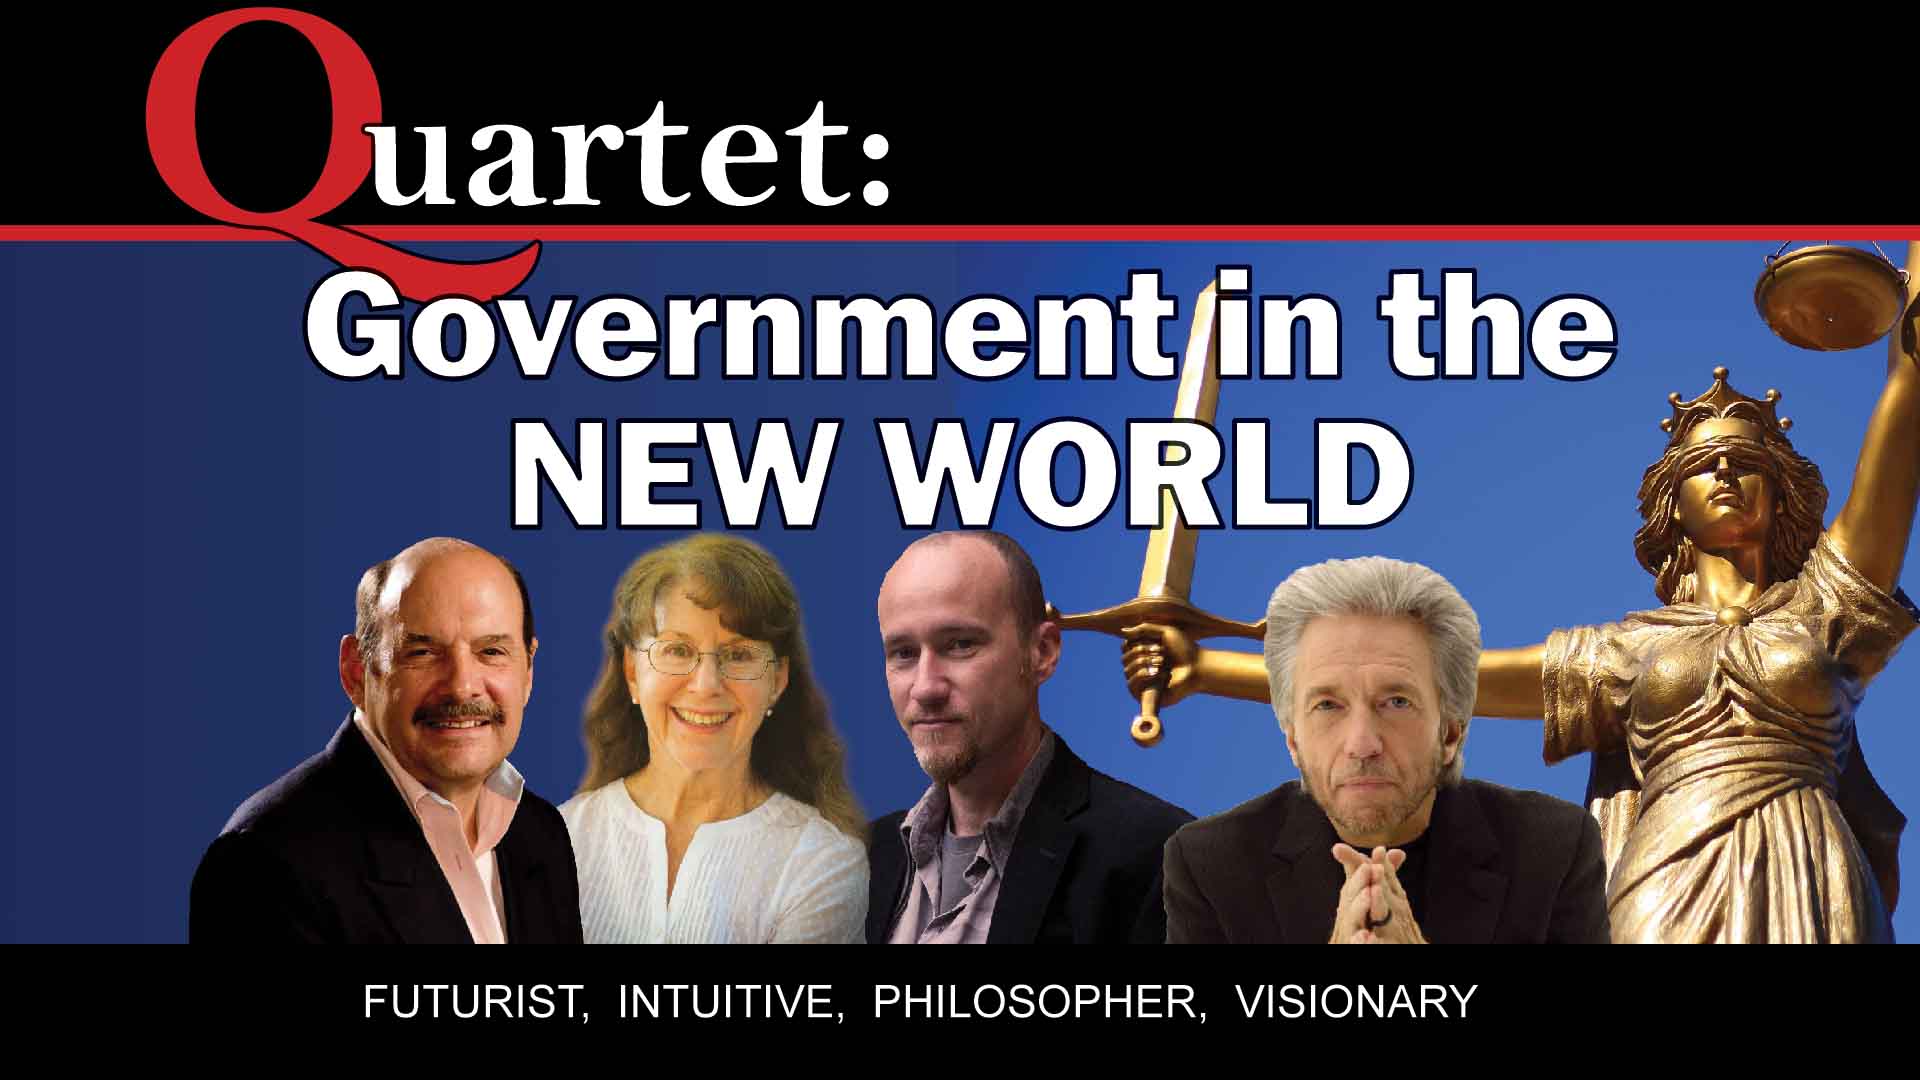 Quartet, Government in the New World